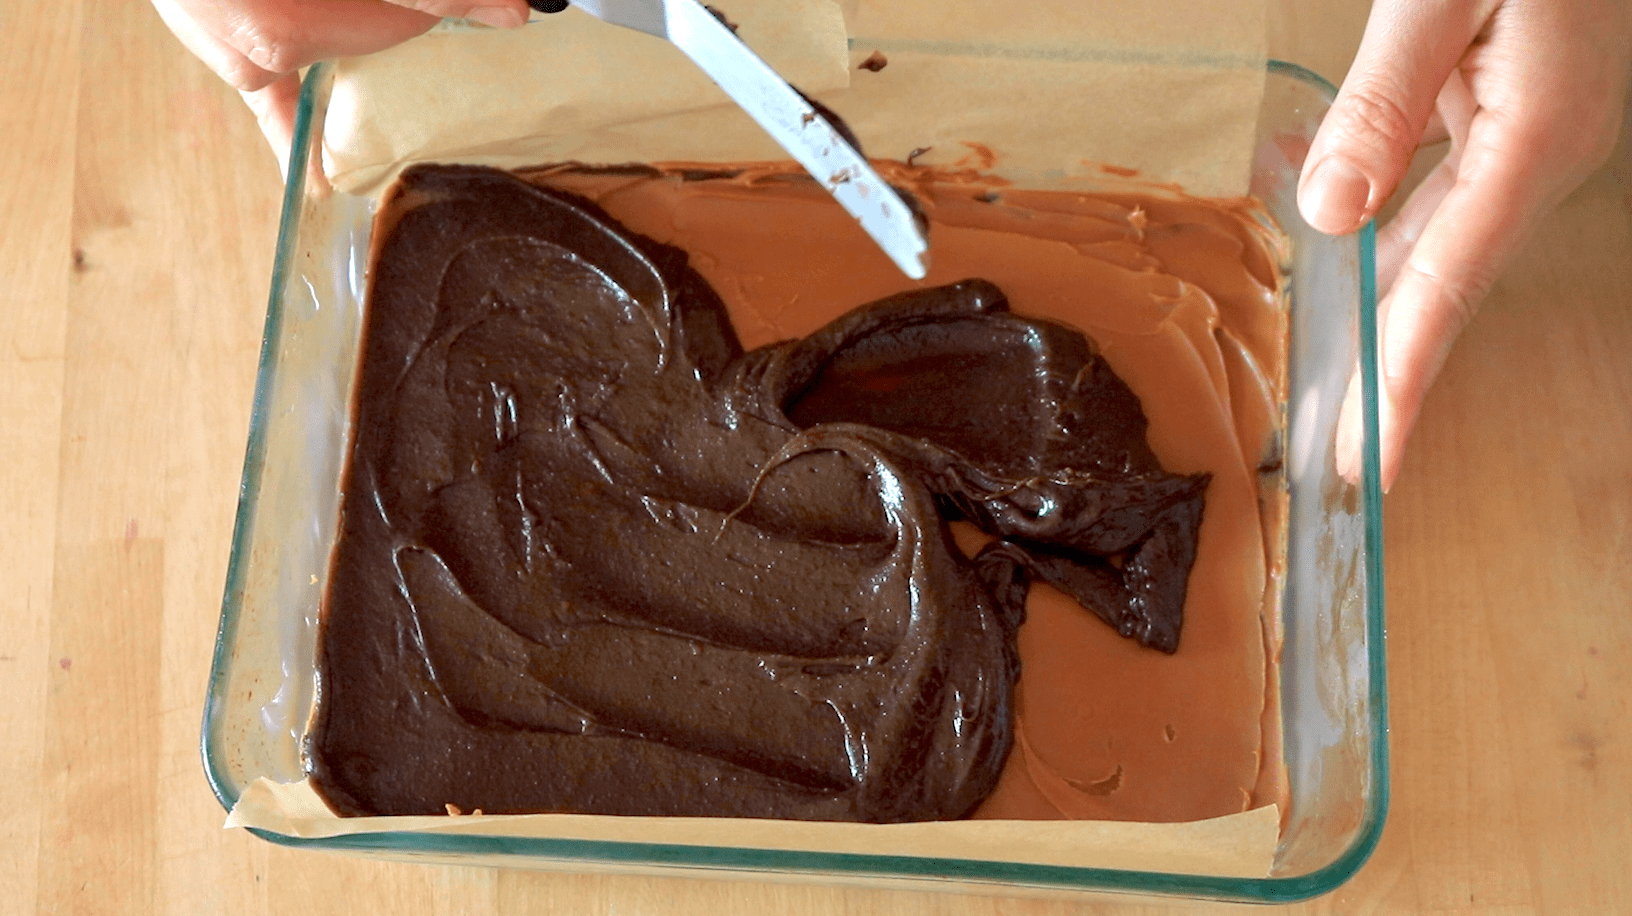 5th layer: Brownie batter spread over the cookie butter. (Photo: Allie Chanthorn Reinmann)